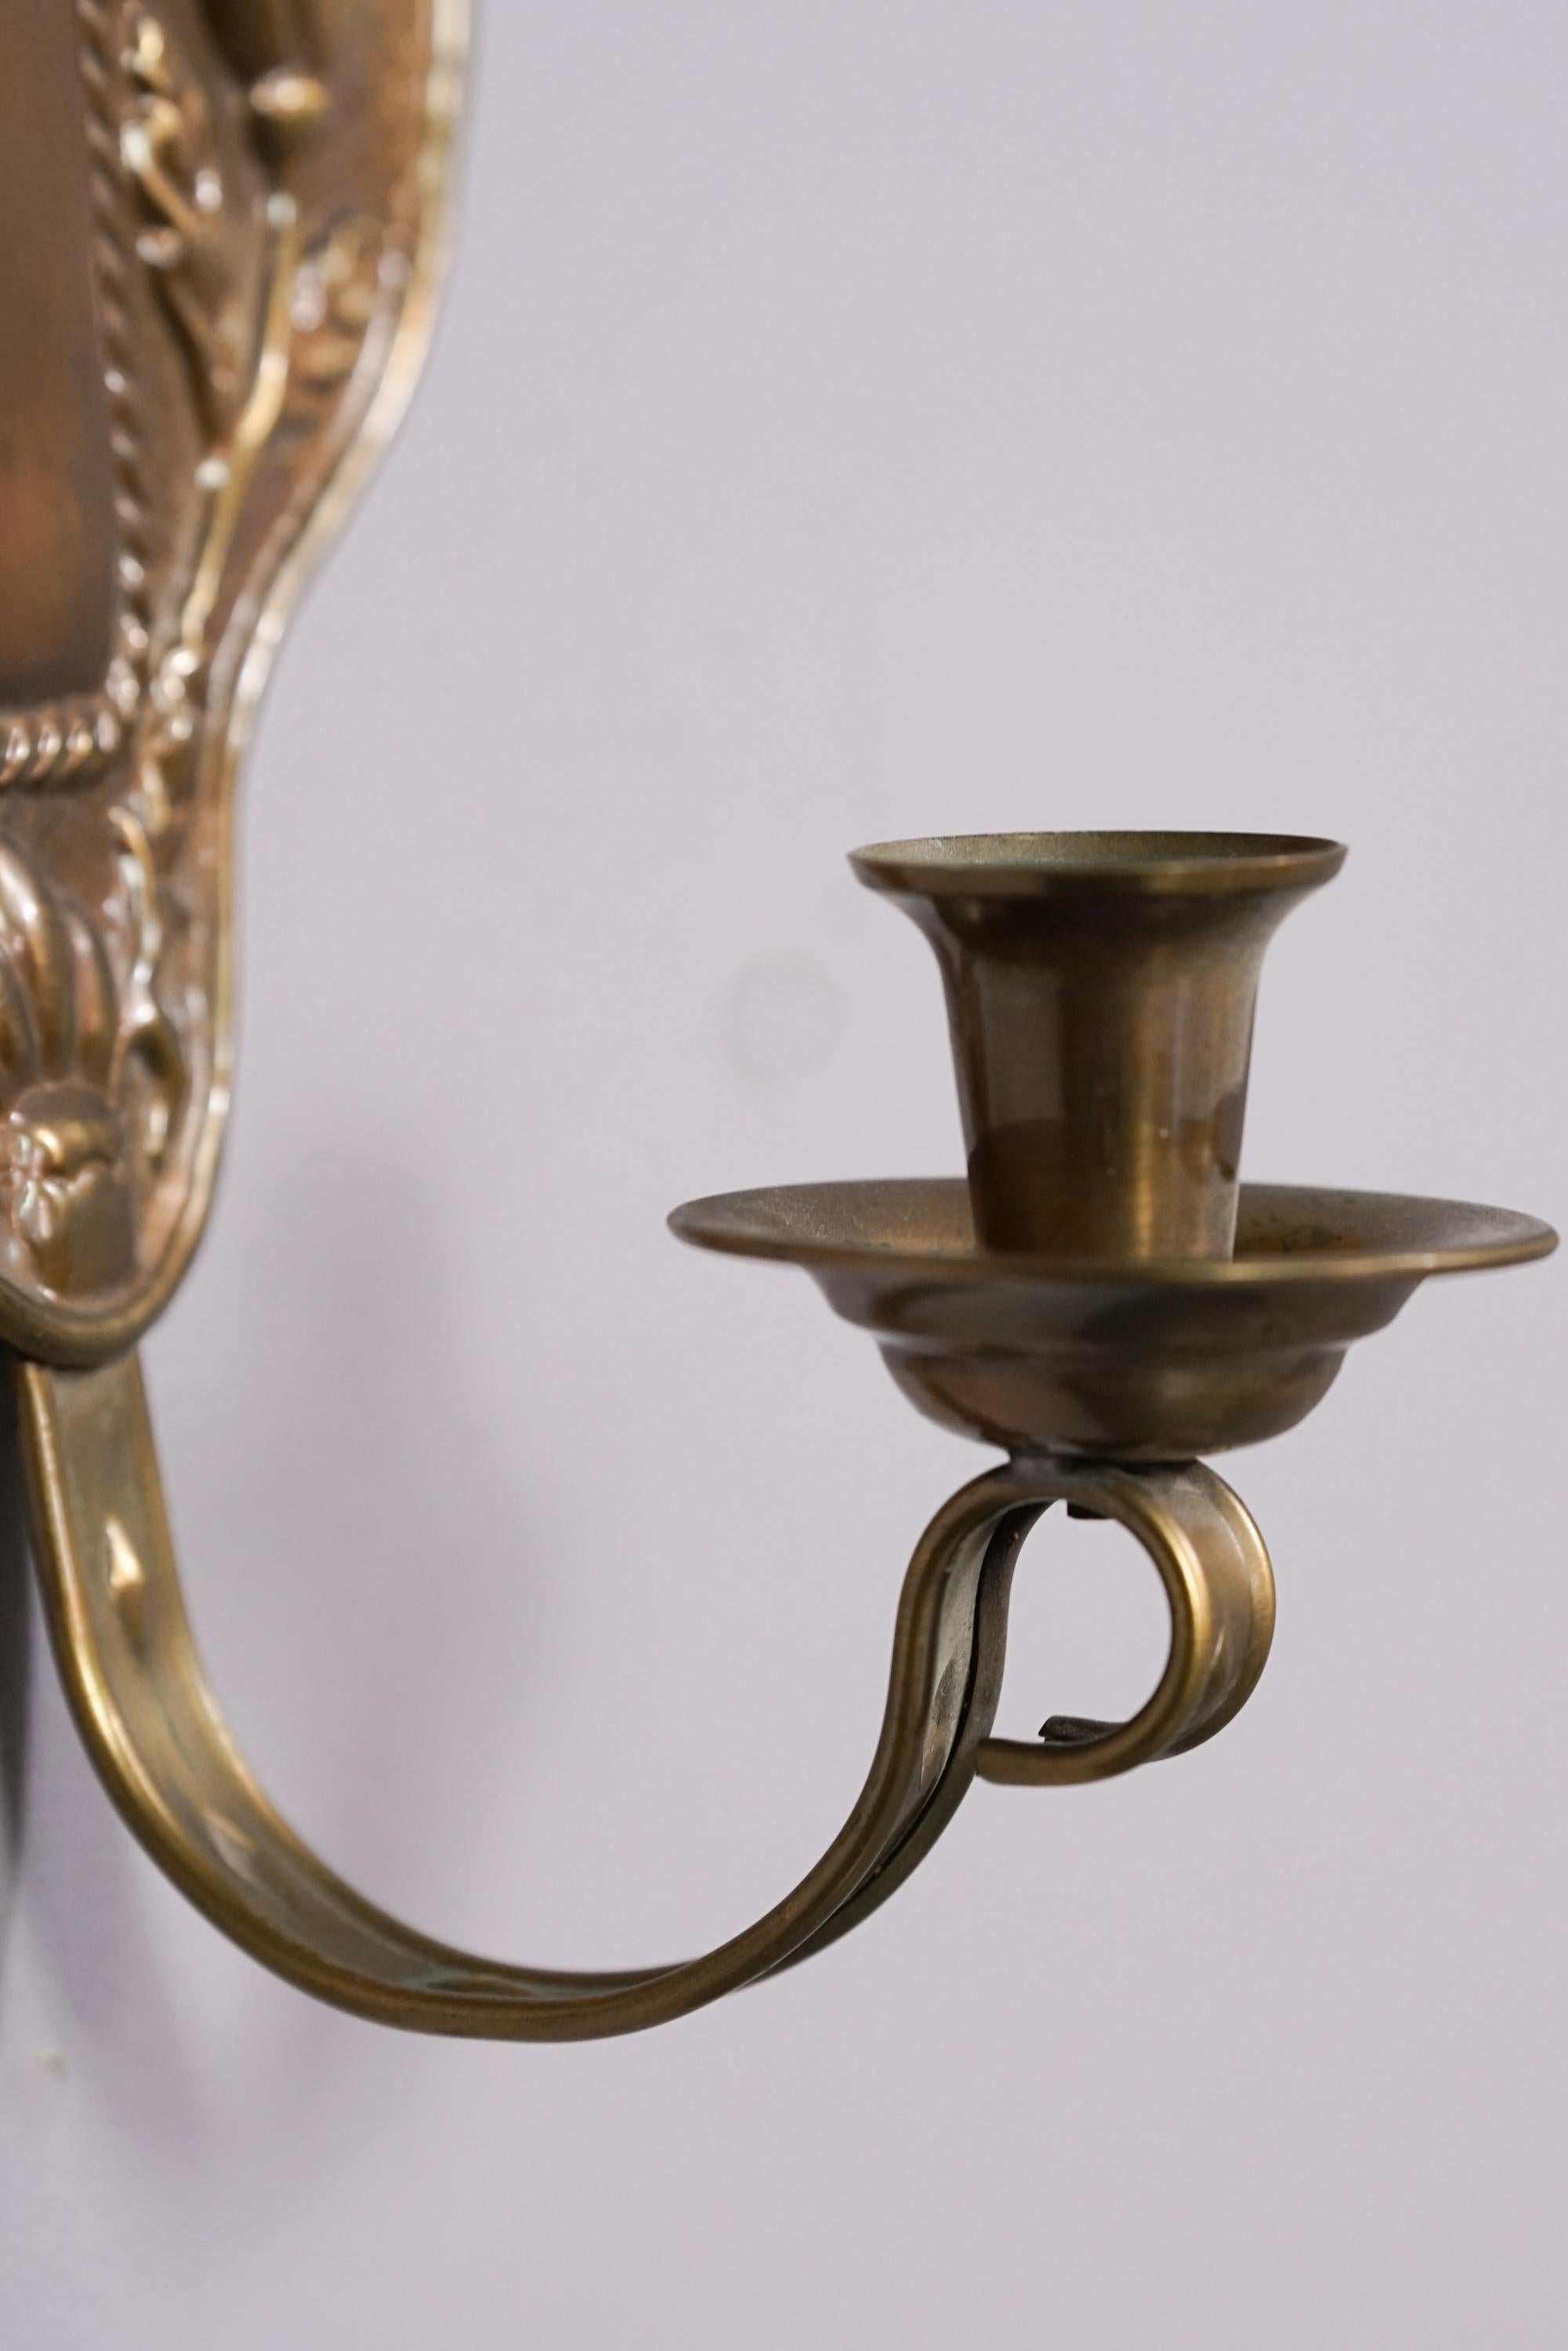 Forged Finnish Brass Candle Sconce Model 1100 by Taidetakomo Hakkarainen, 1920s/1930s For Sale